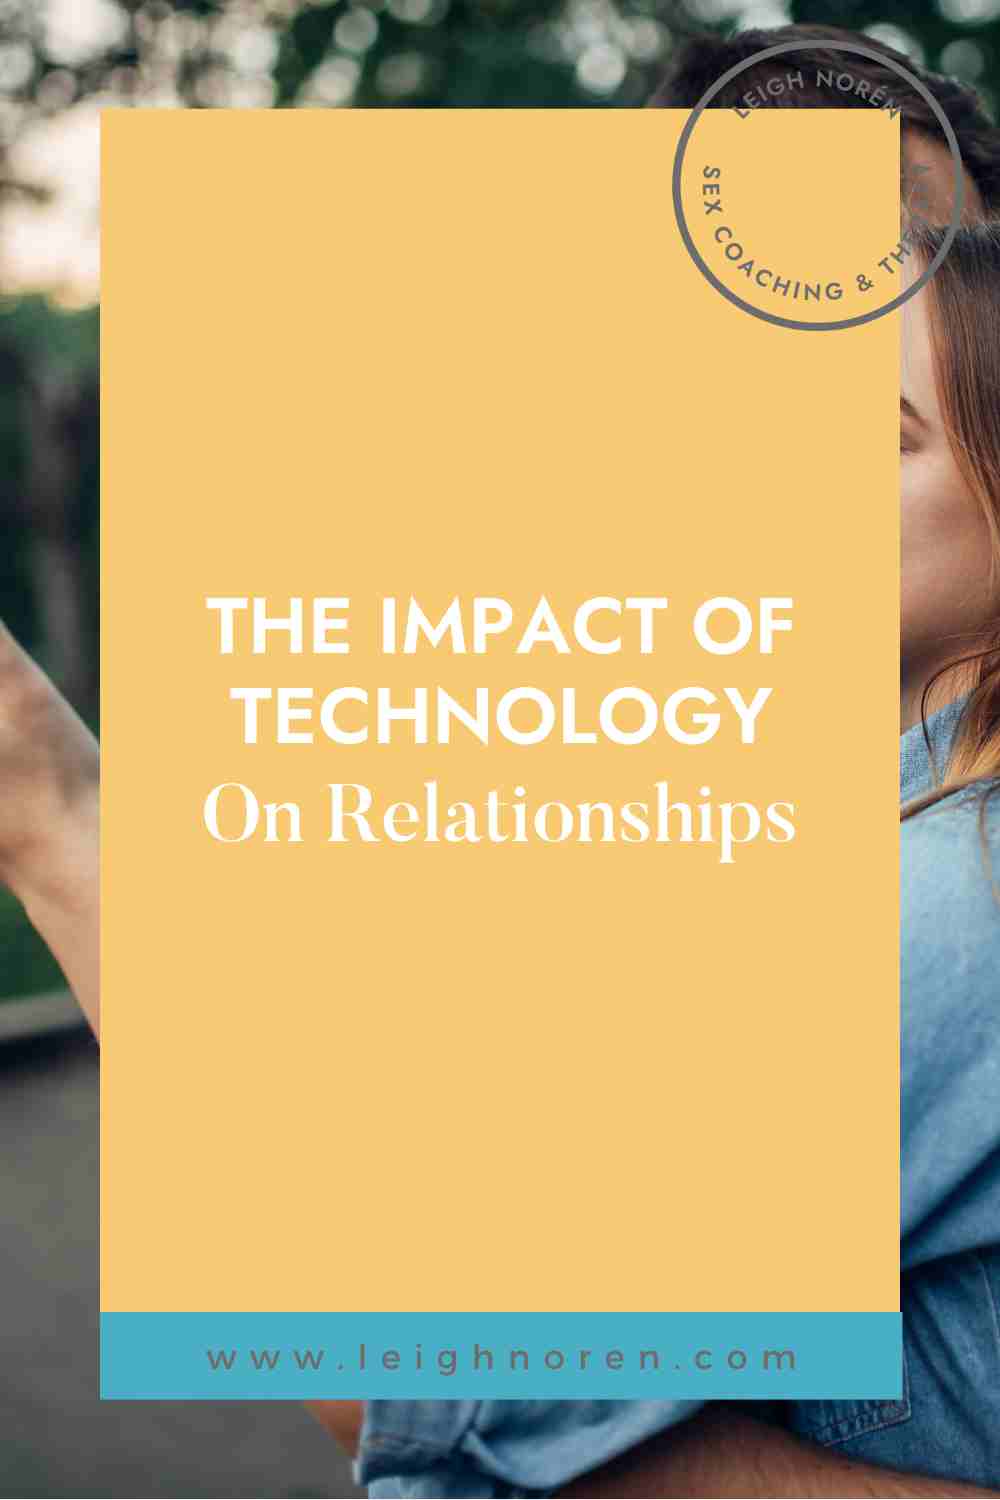 The impact of technology on relationships